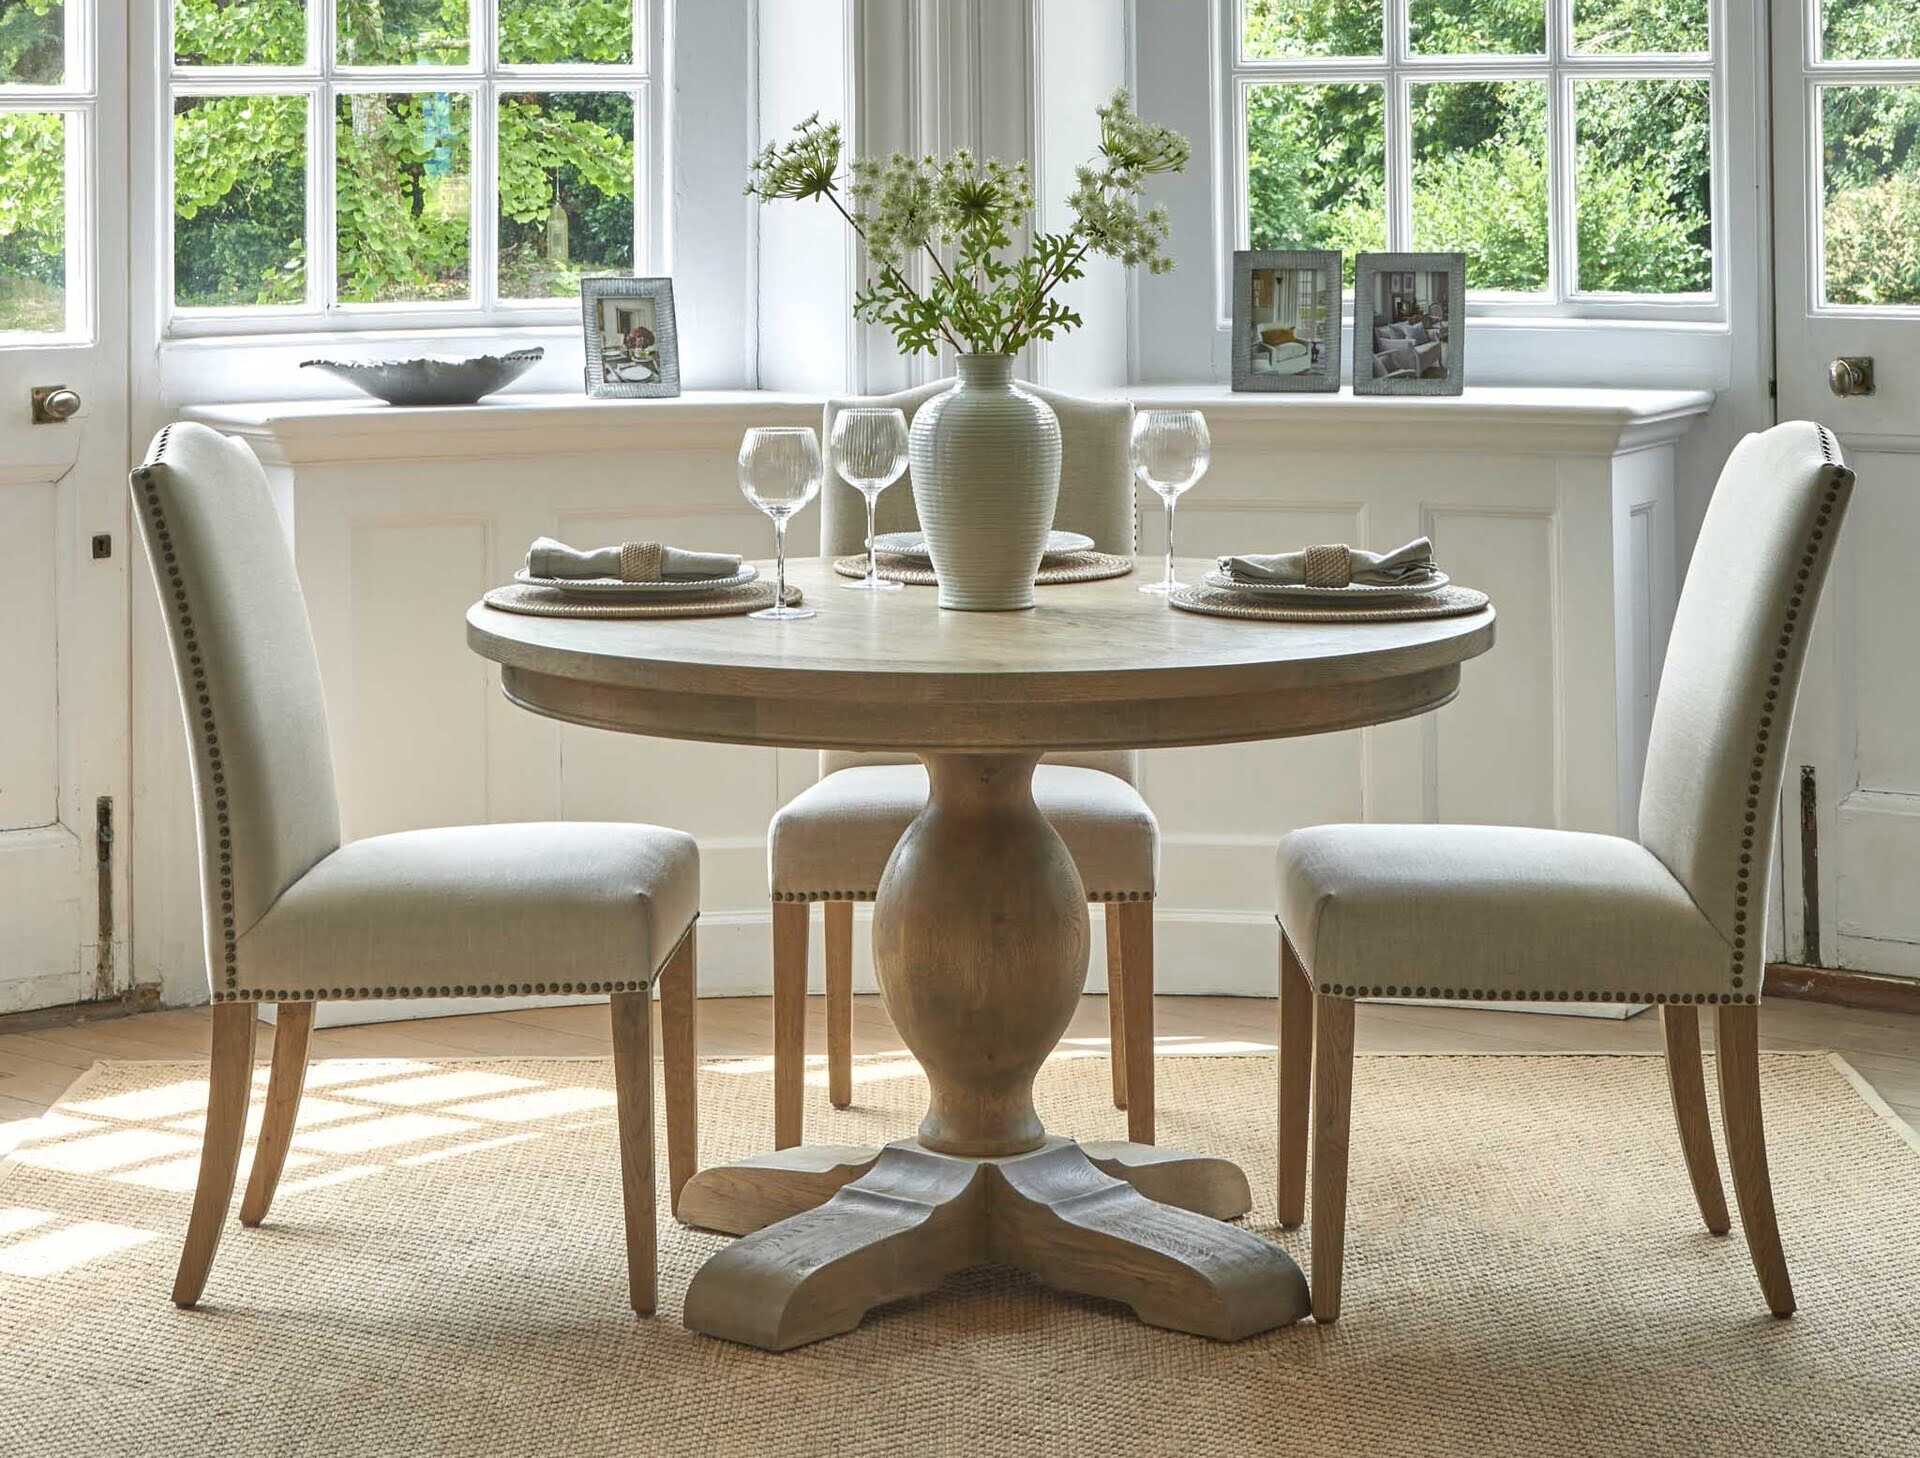 What Is The Style Of A Pedestal Table?